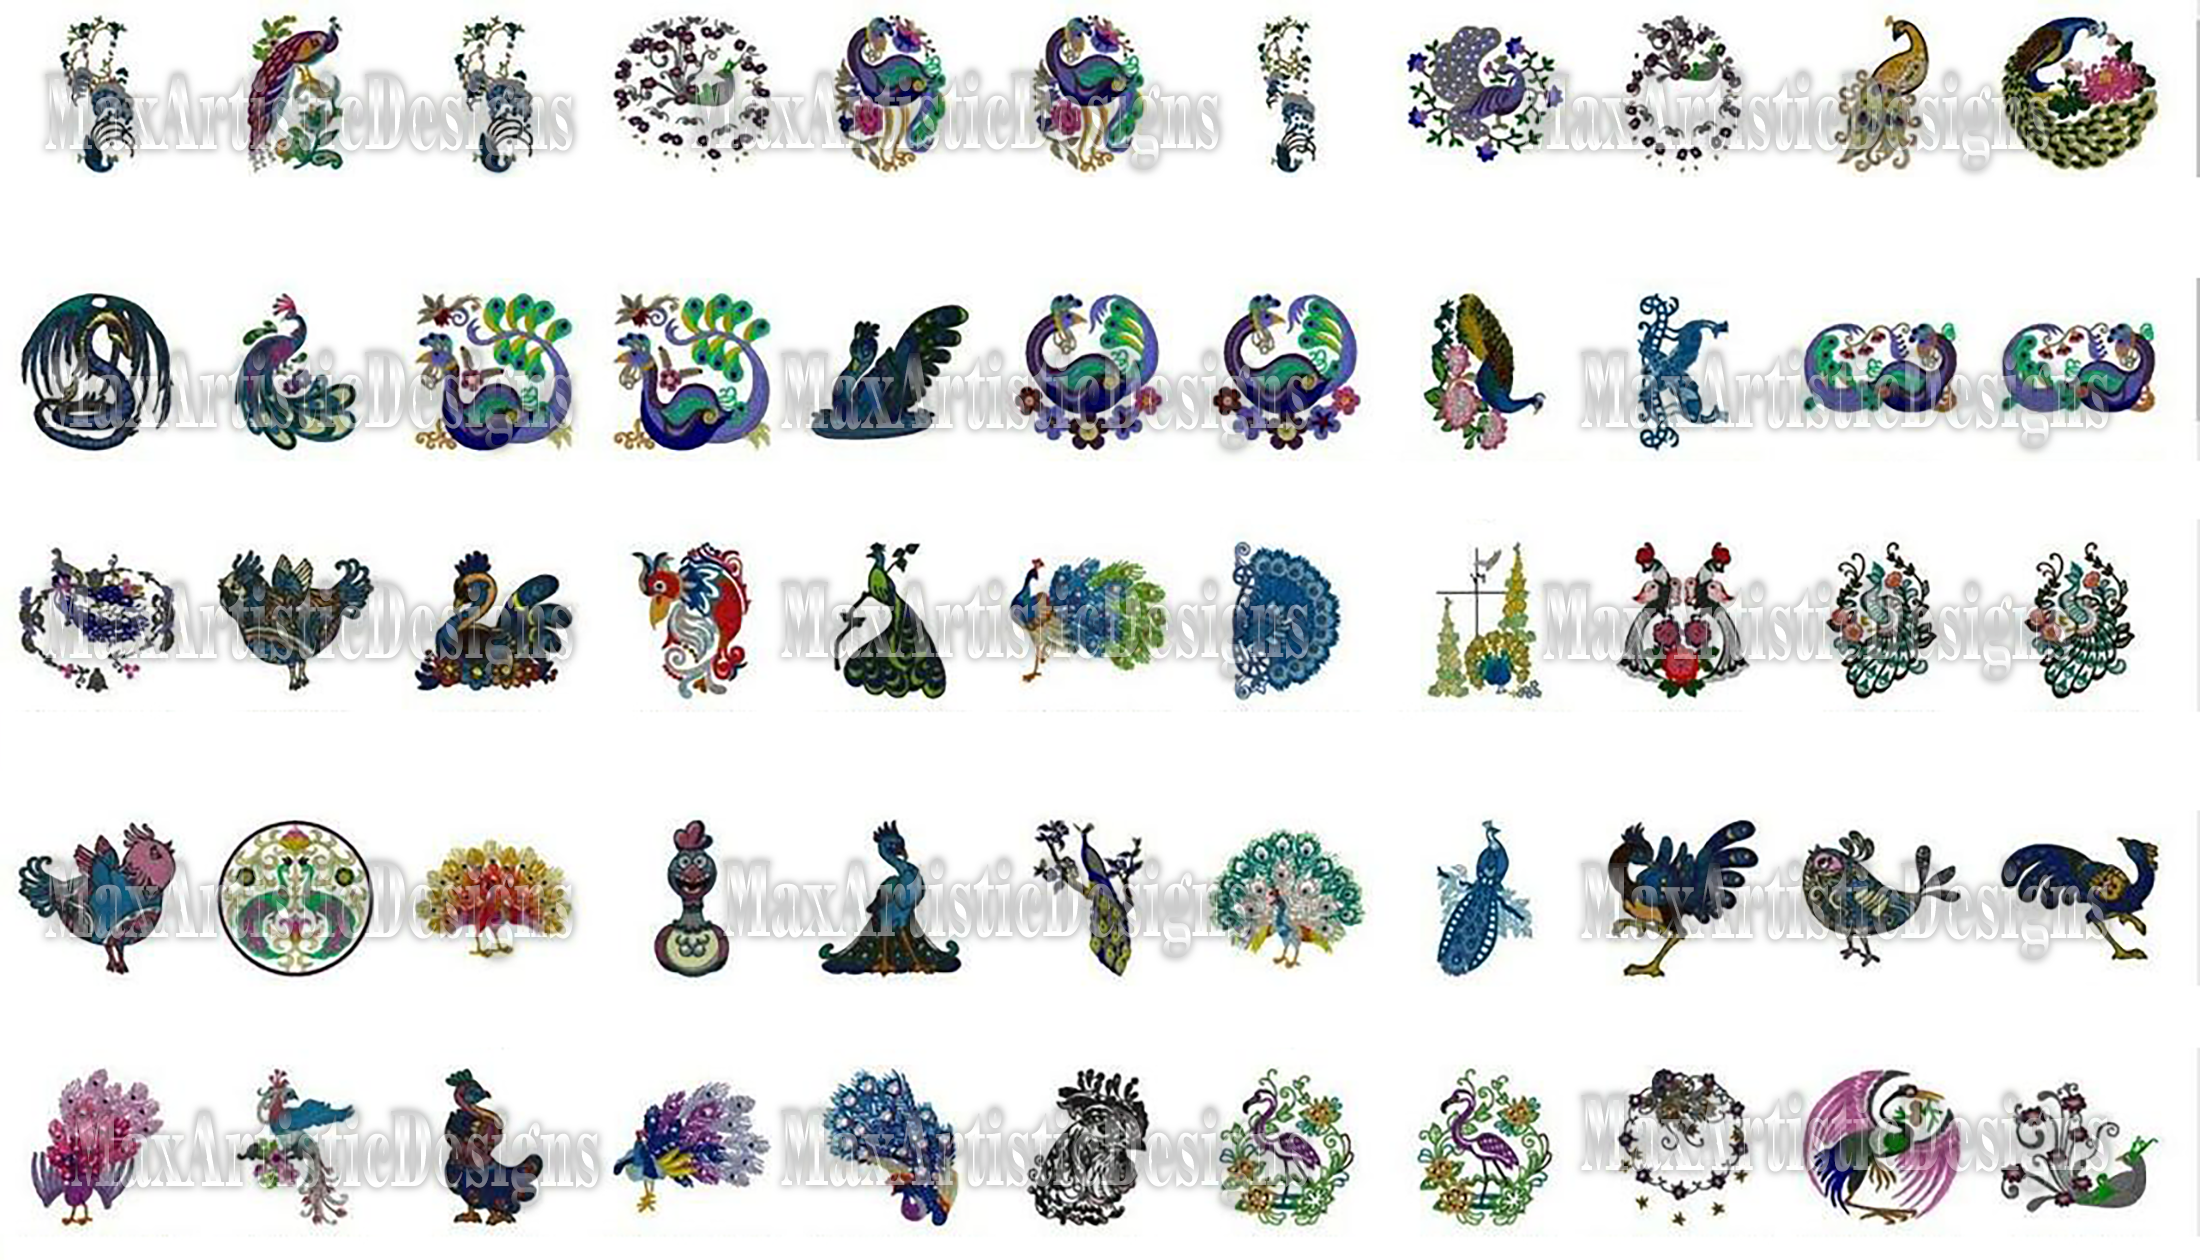 1600+ embroidery owls peacocks chickens birds and more birds embroidery machine files pes emb hus format